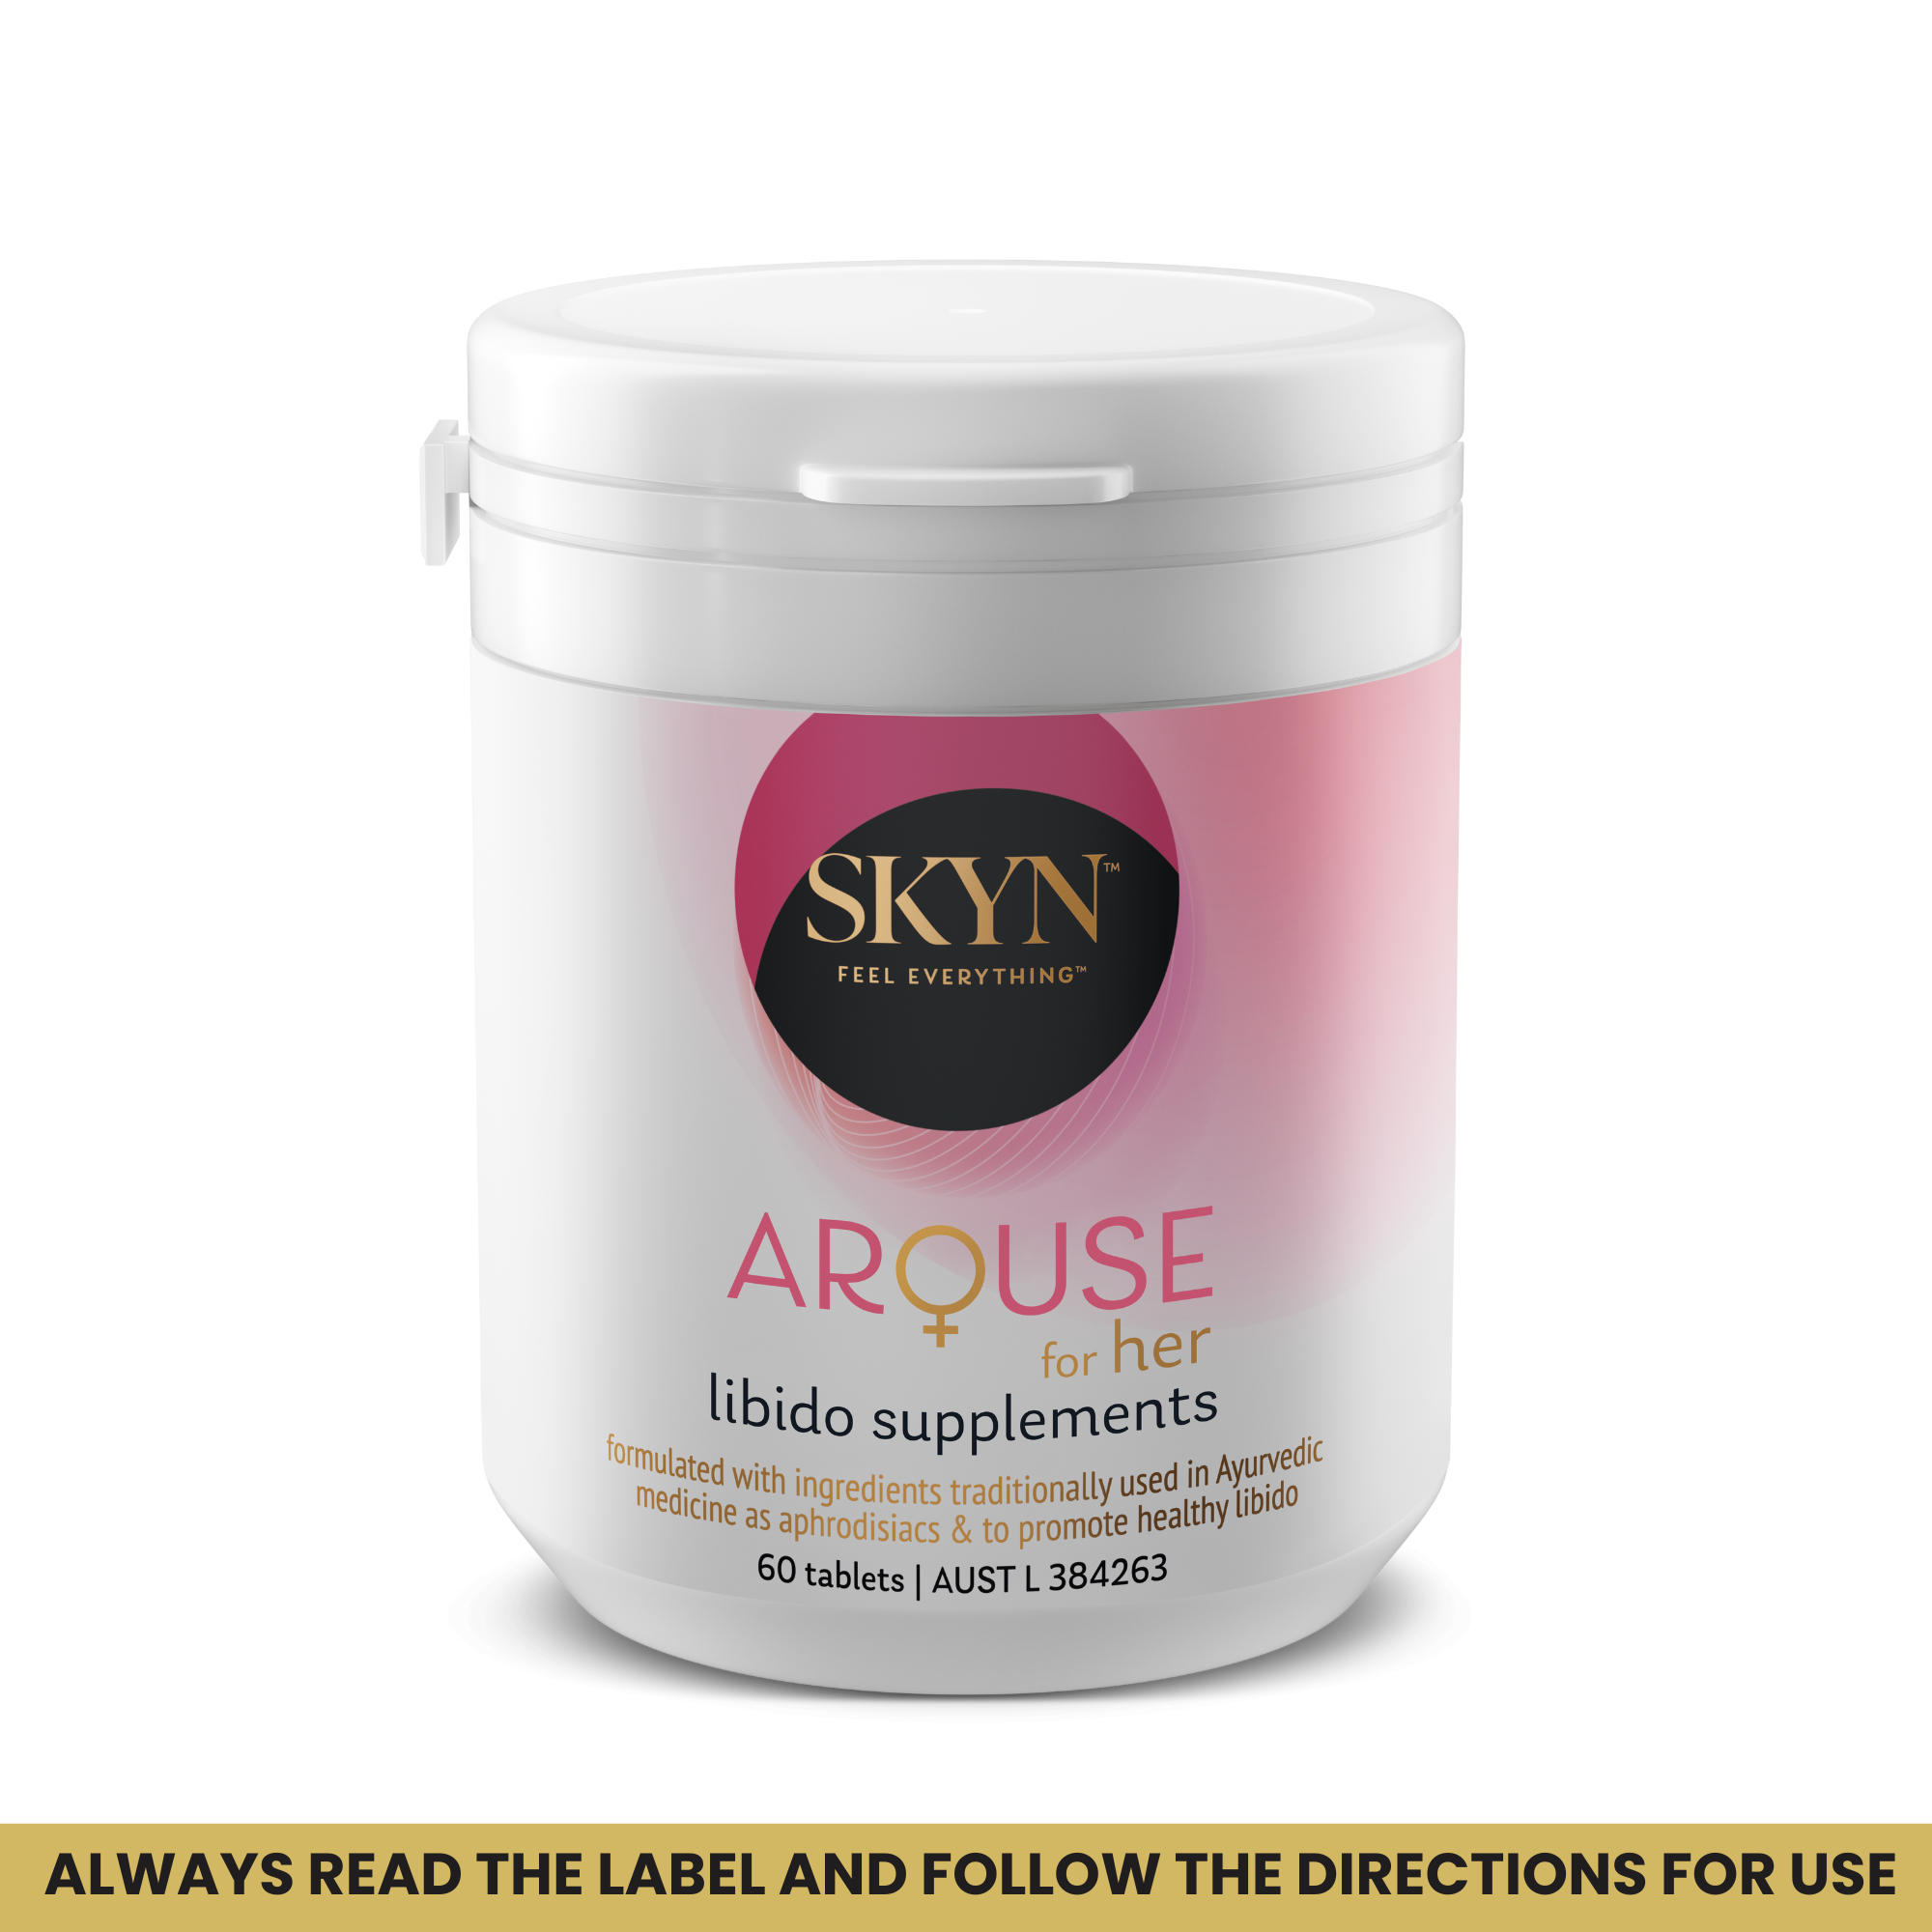 SKYN™ Arouse for Her Libido Supplements